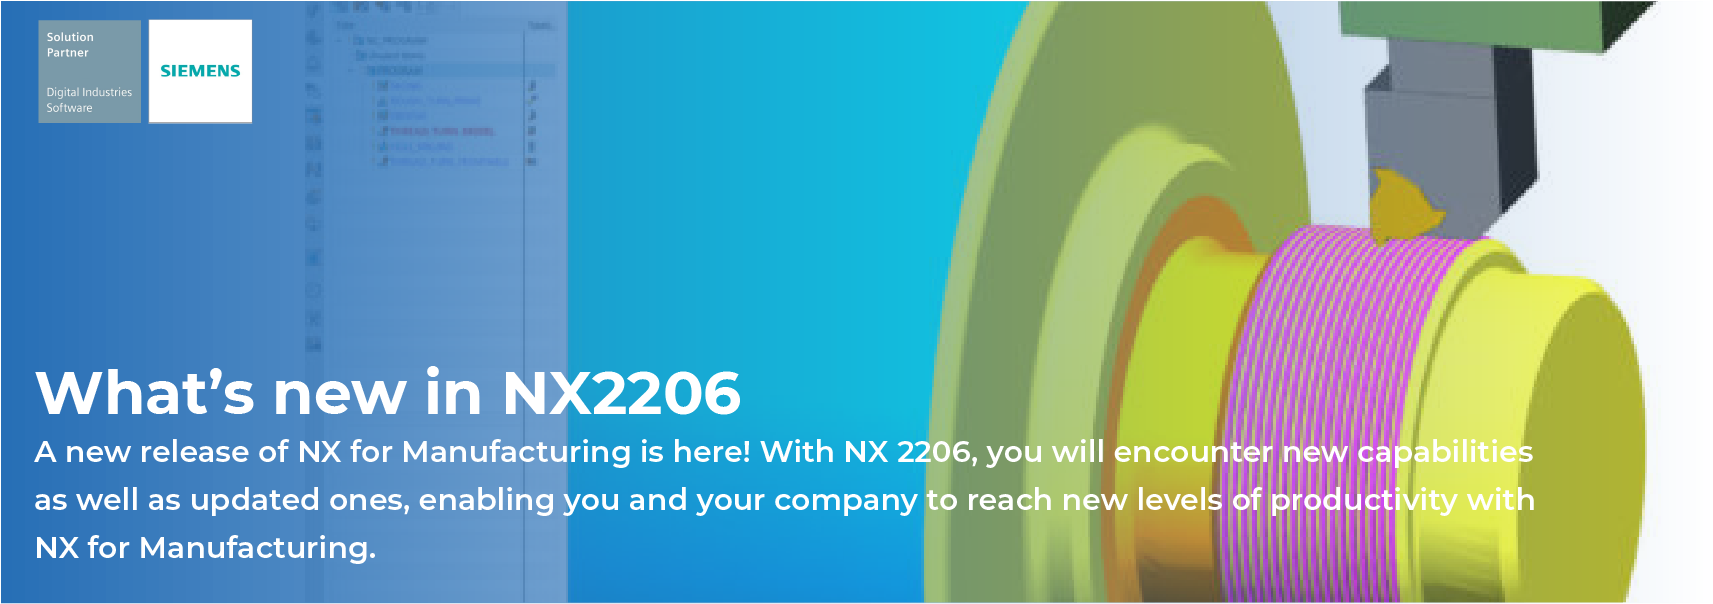 What's new in NX2206